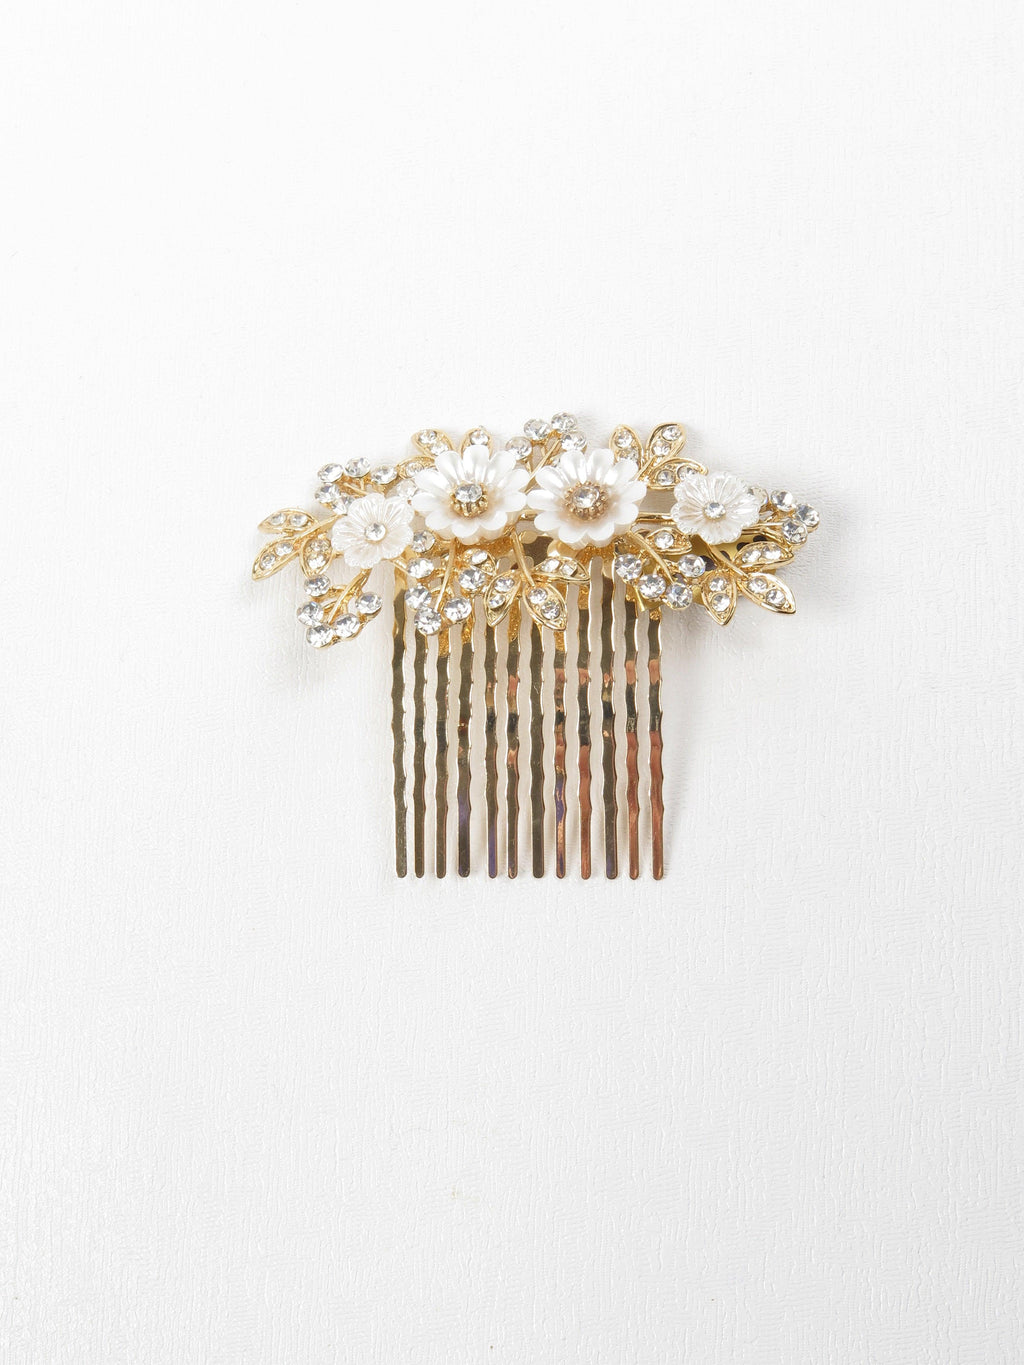 Gold Floral & Diamante Hair Comb - The Harlequin